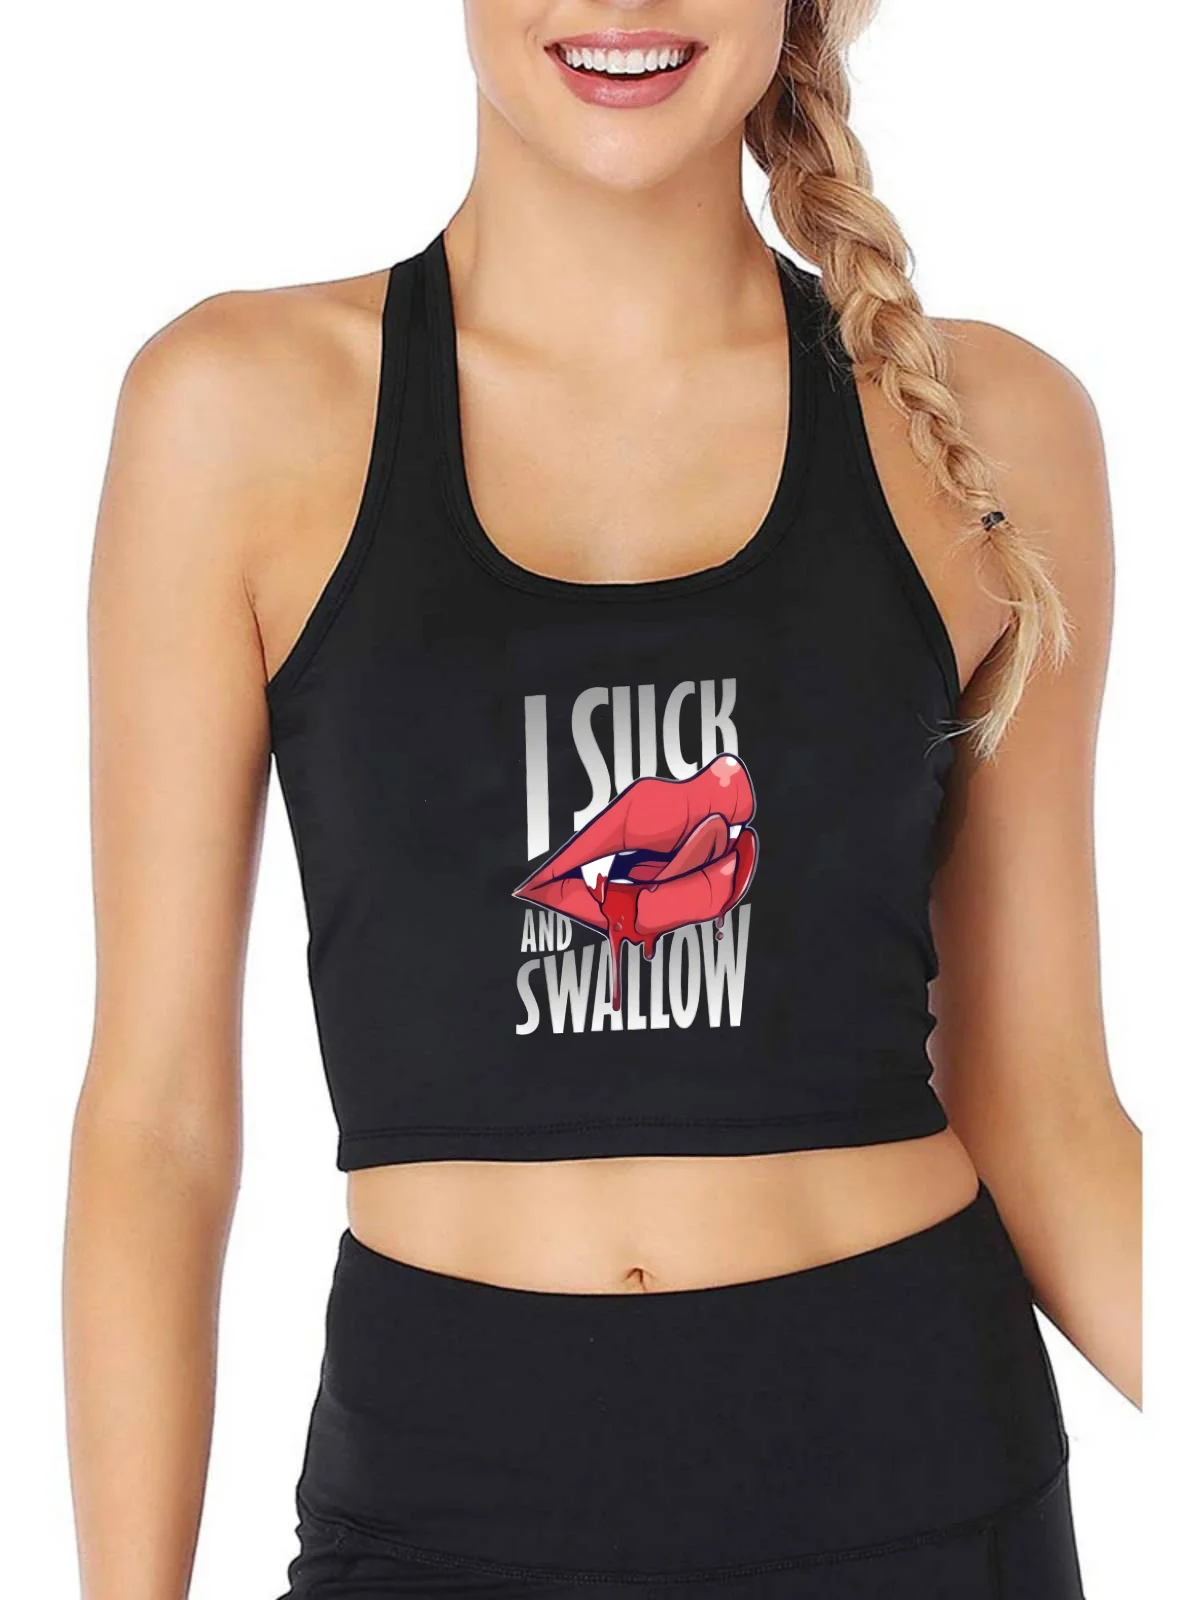 

Blood-Sucking Red Lips Graphics Suck Swallow Print Sexy Crop Top Hotwife Humorous Flirty Tank Tops Swinger Naughty Camisole